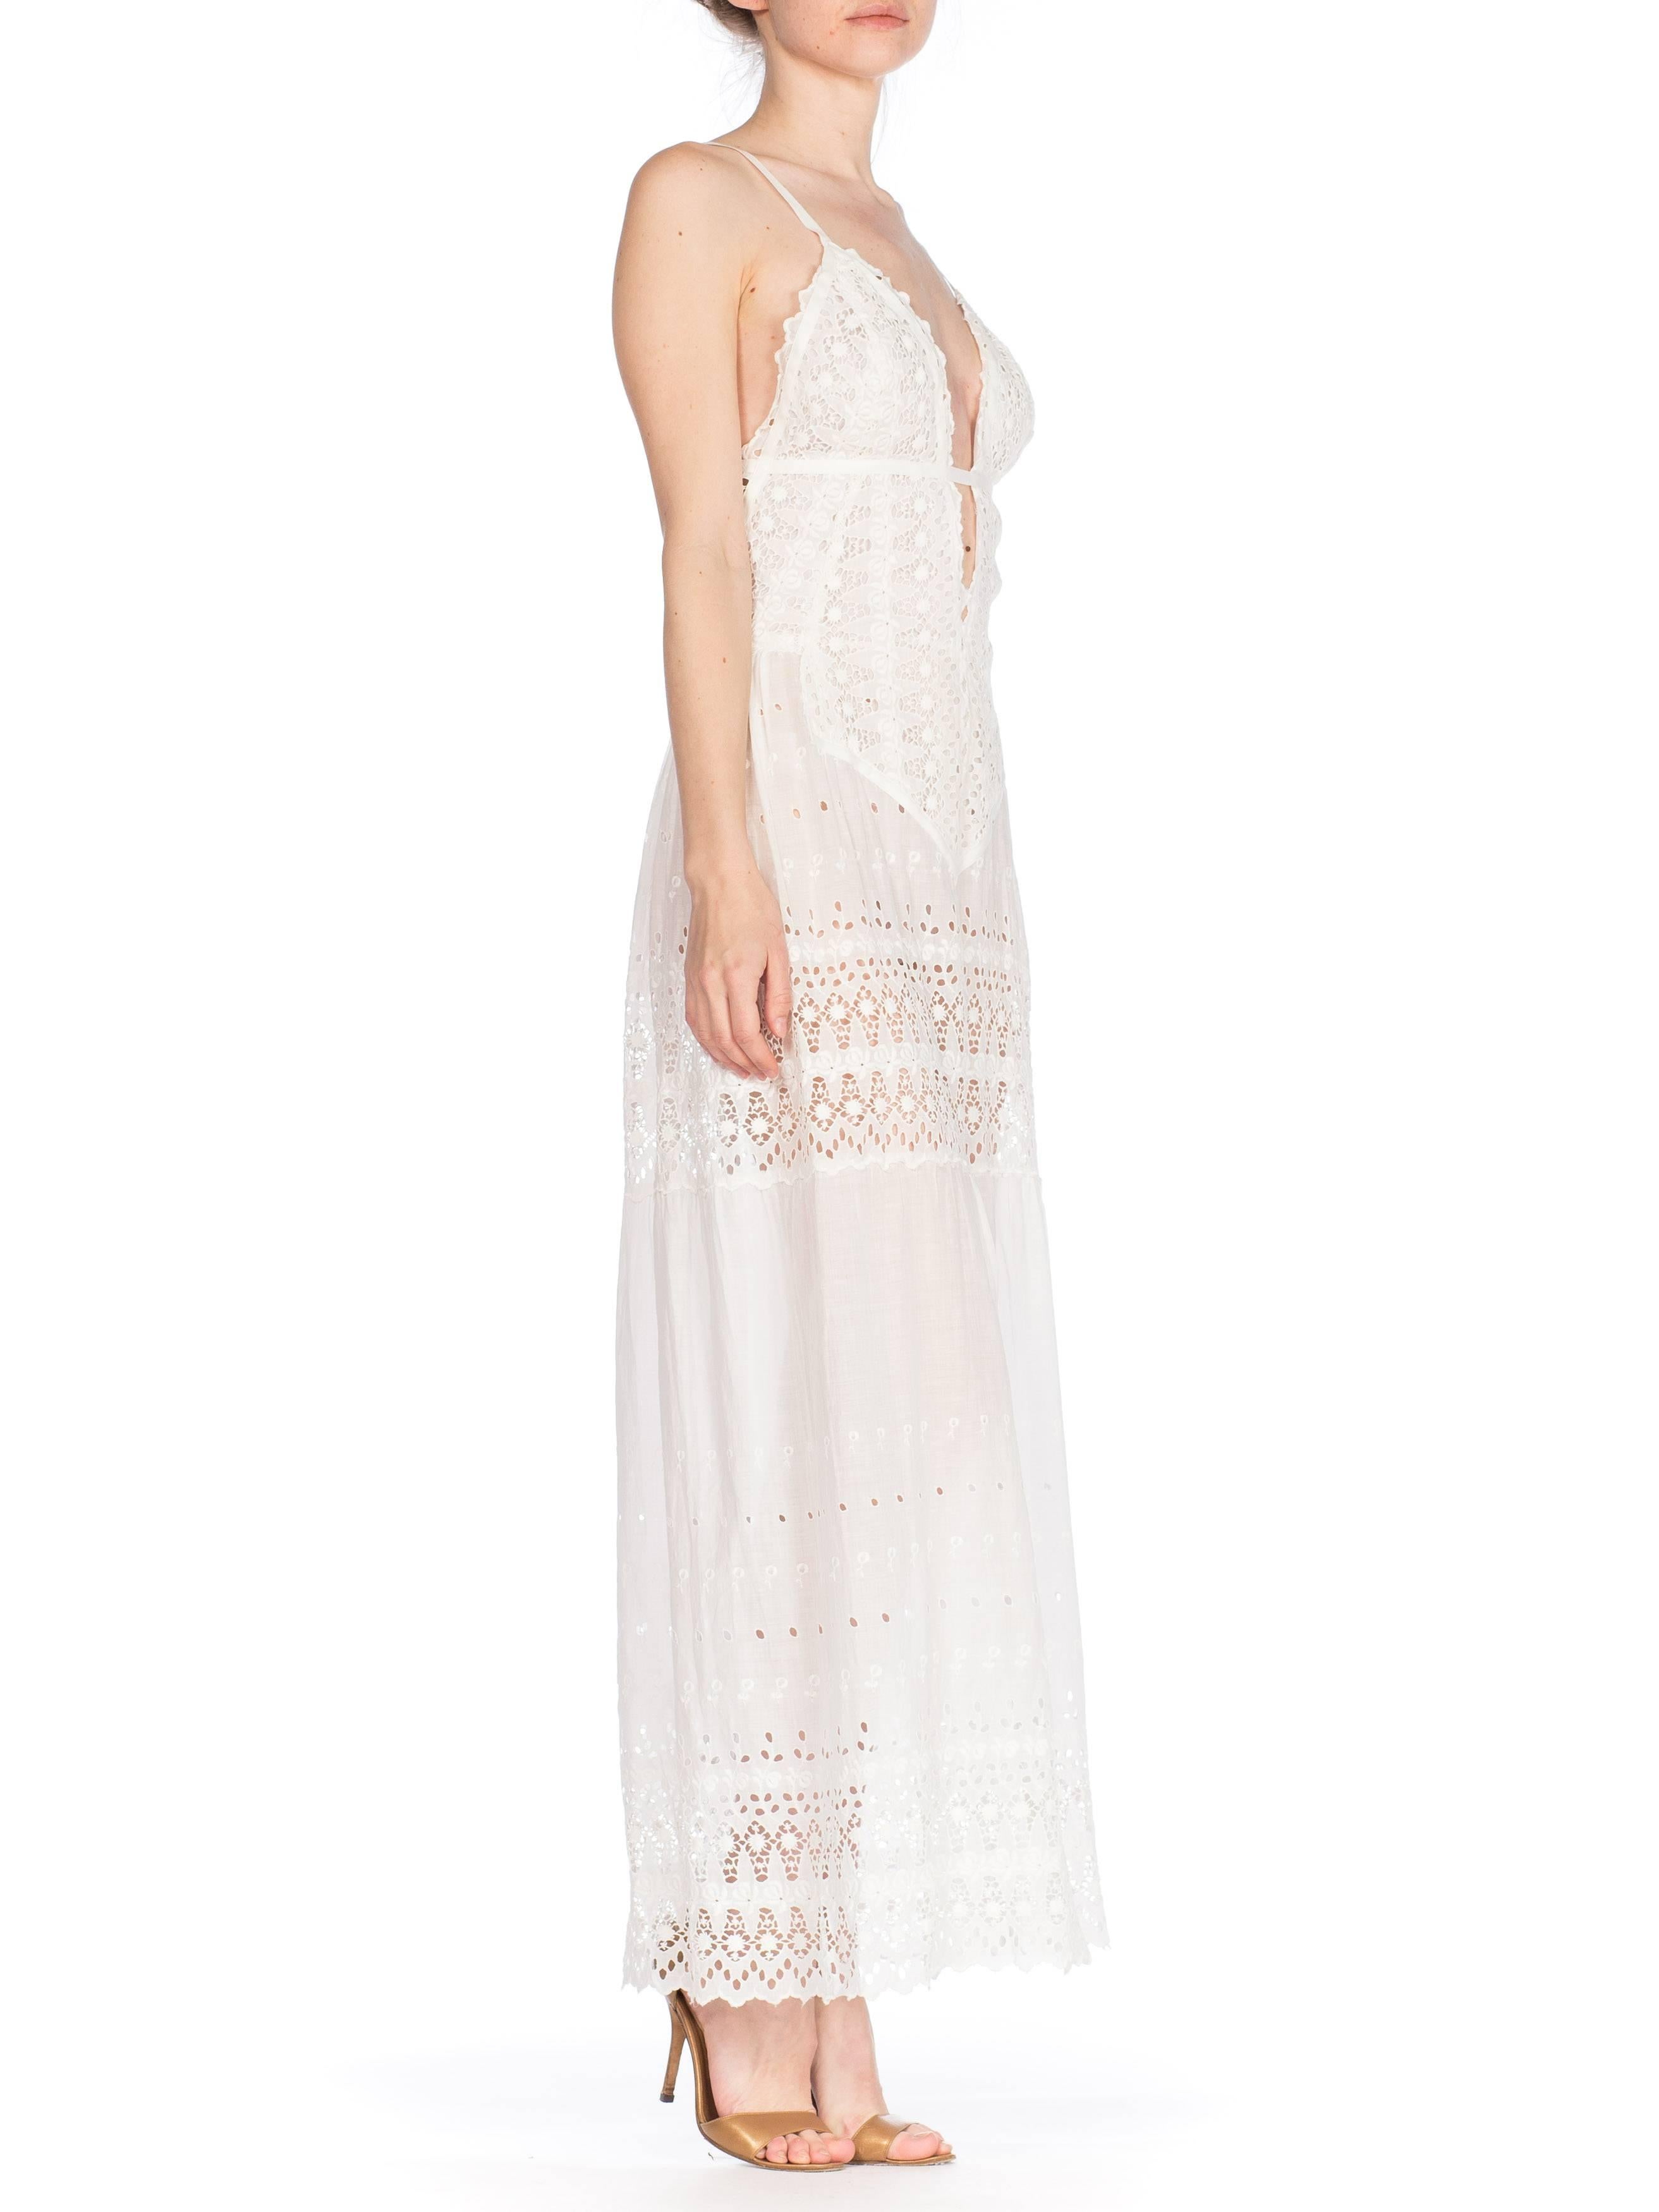 White Cotton Victorian Eyelet  Embroidered Lace Maxi Dress 1